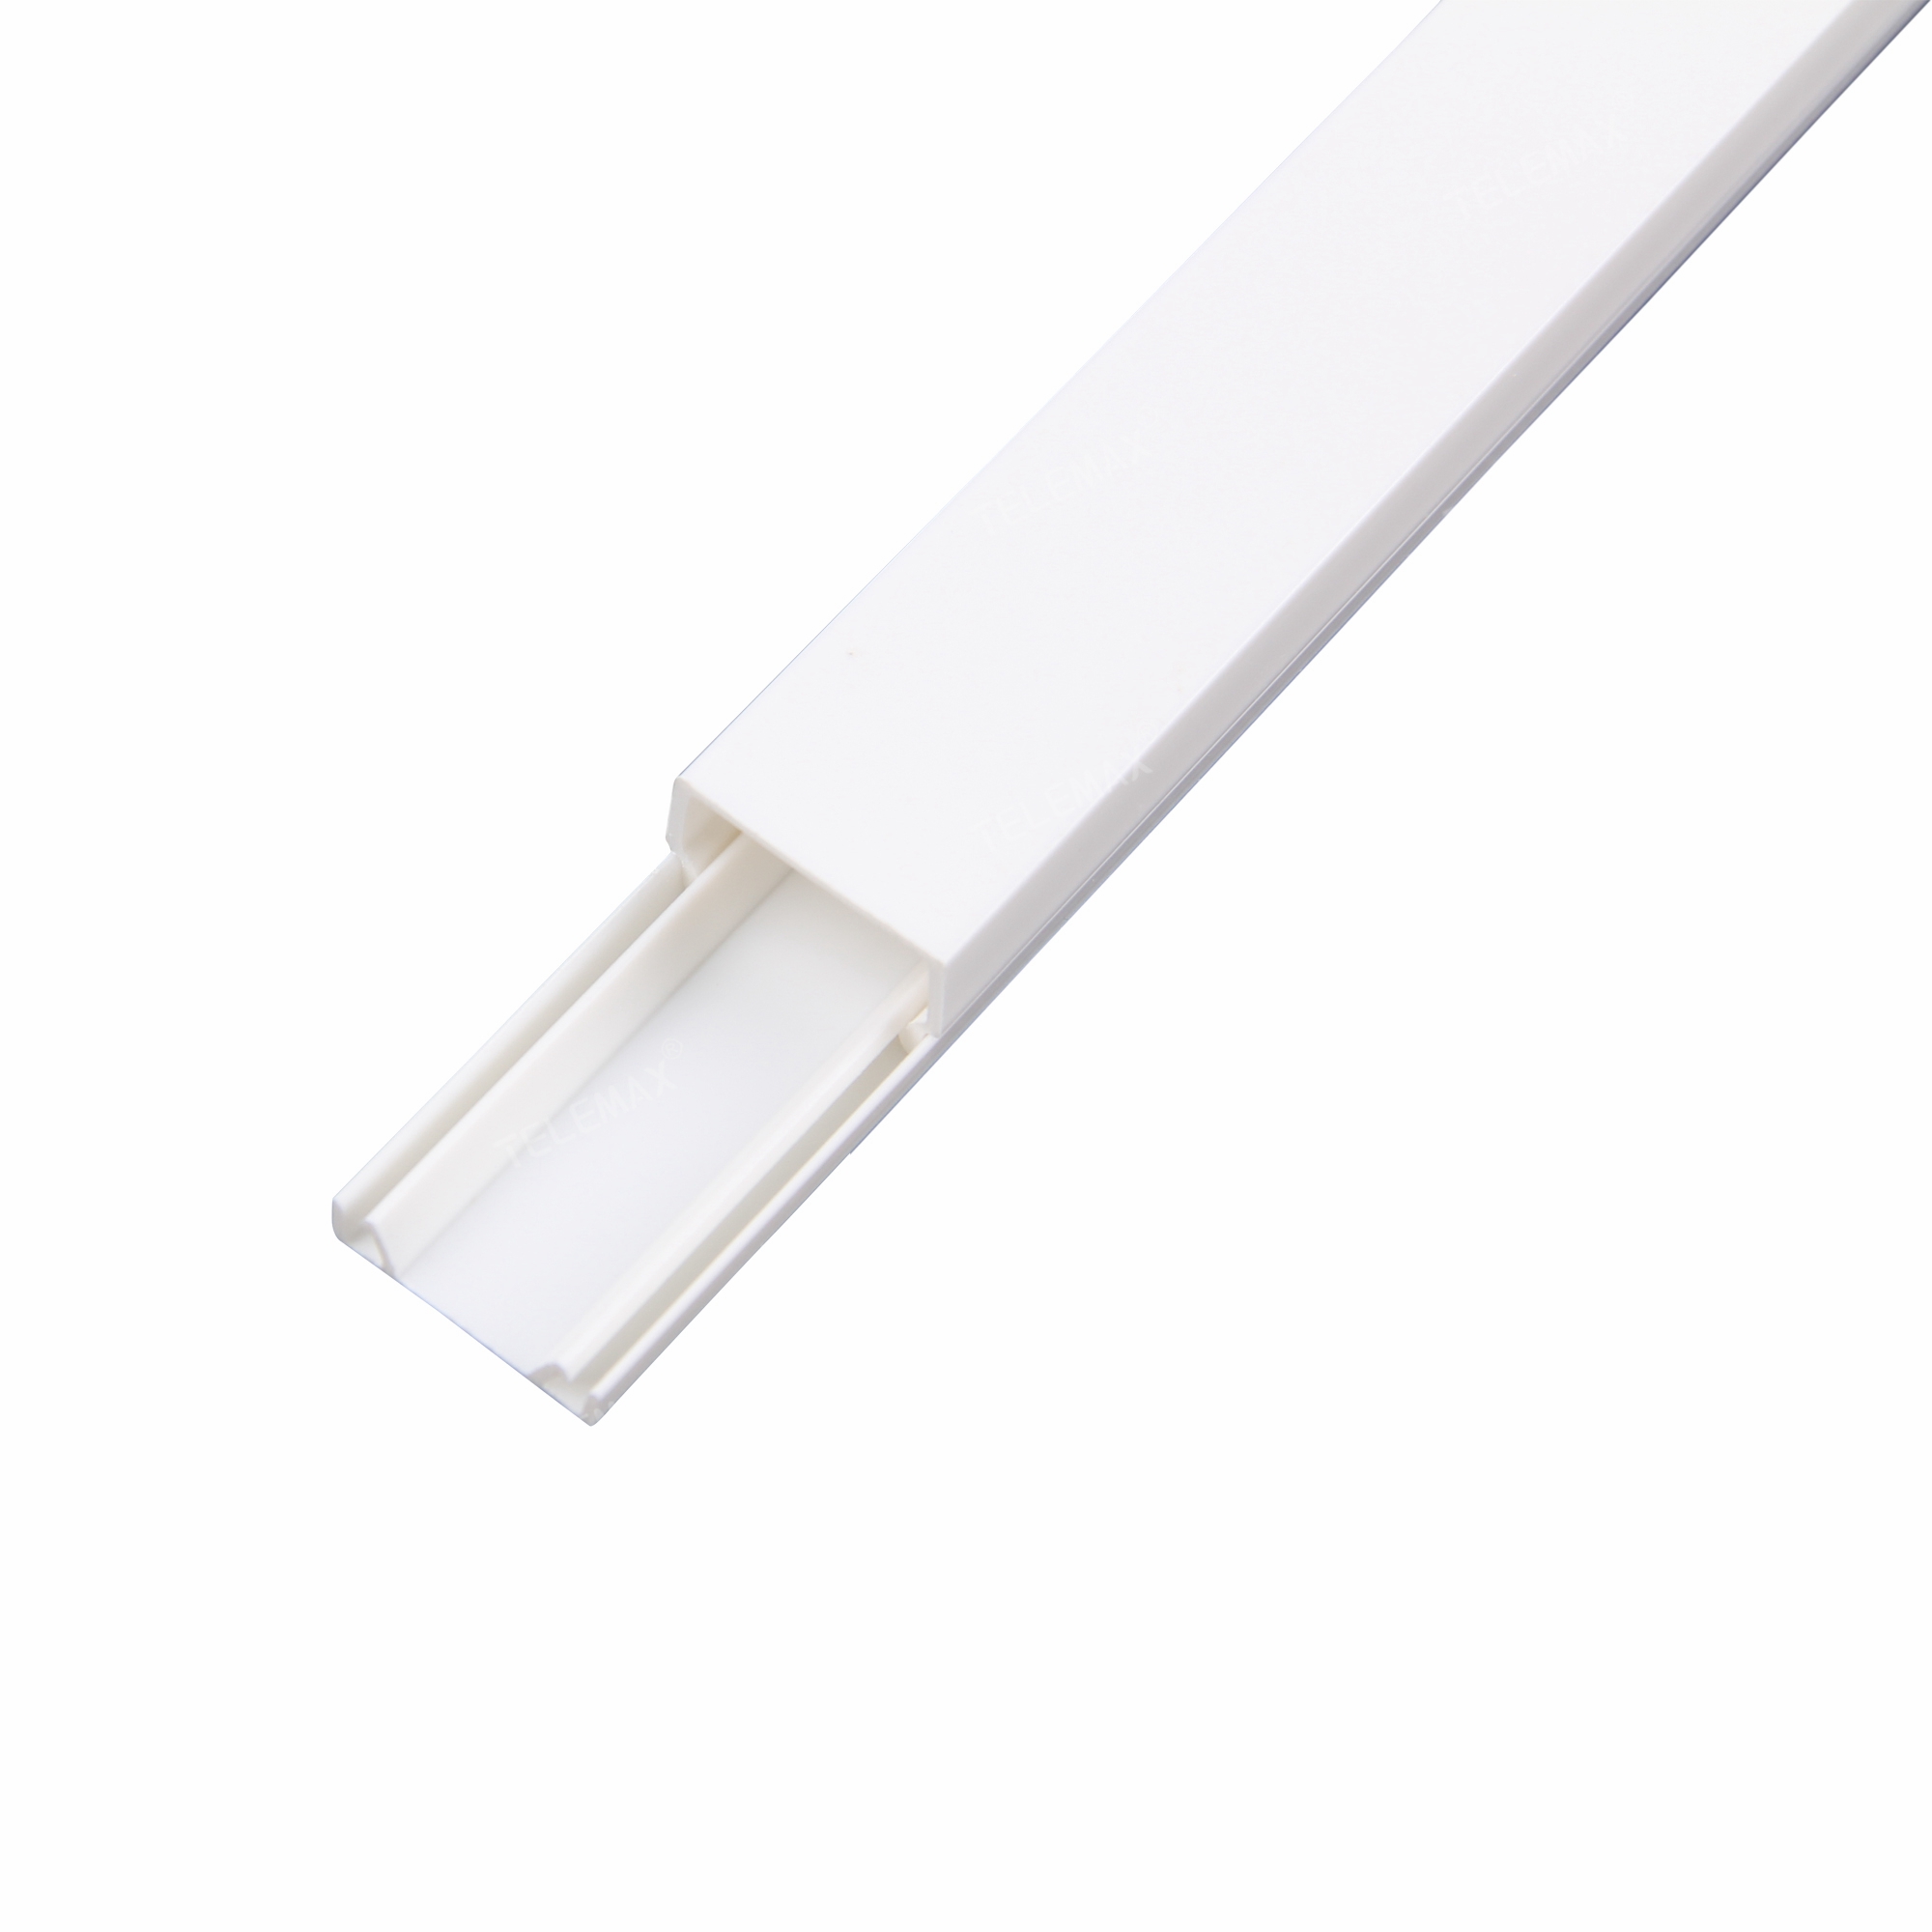 Wire PVC Trunking, Light in weight, Weather proof